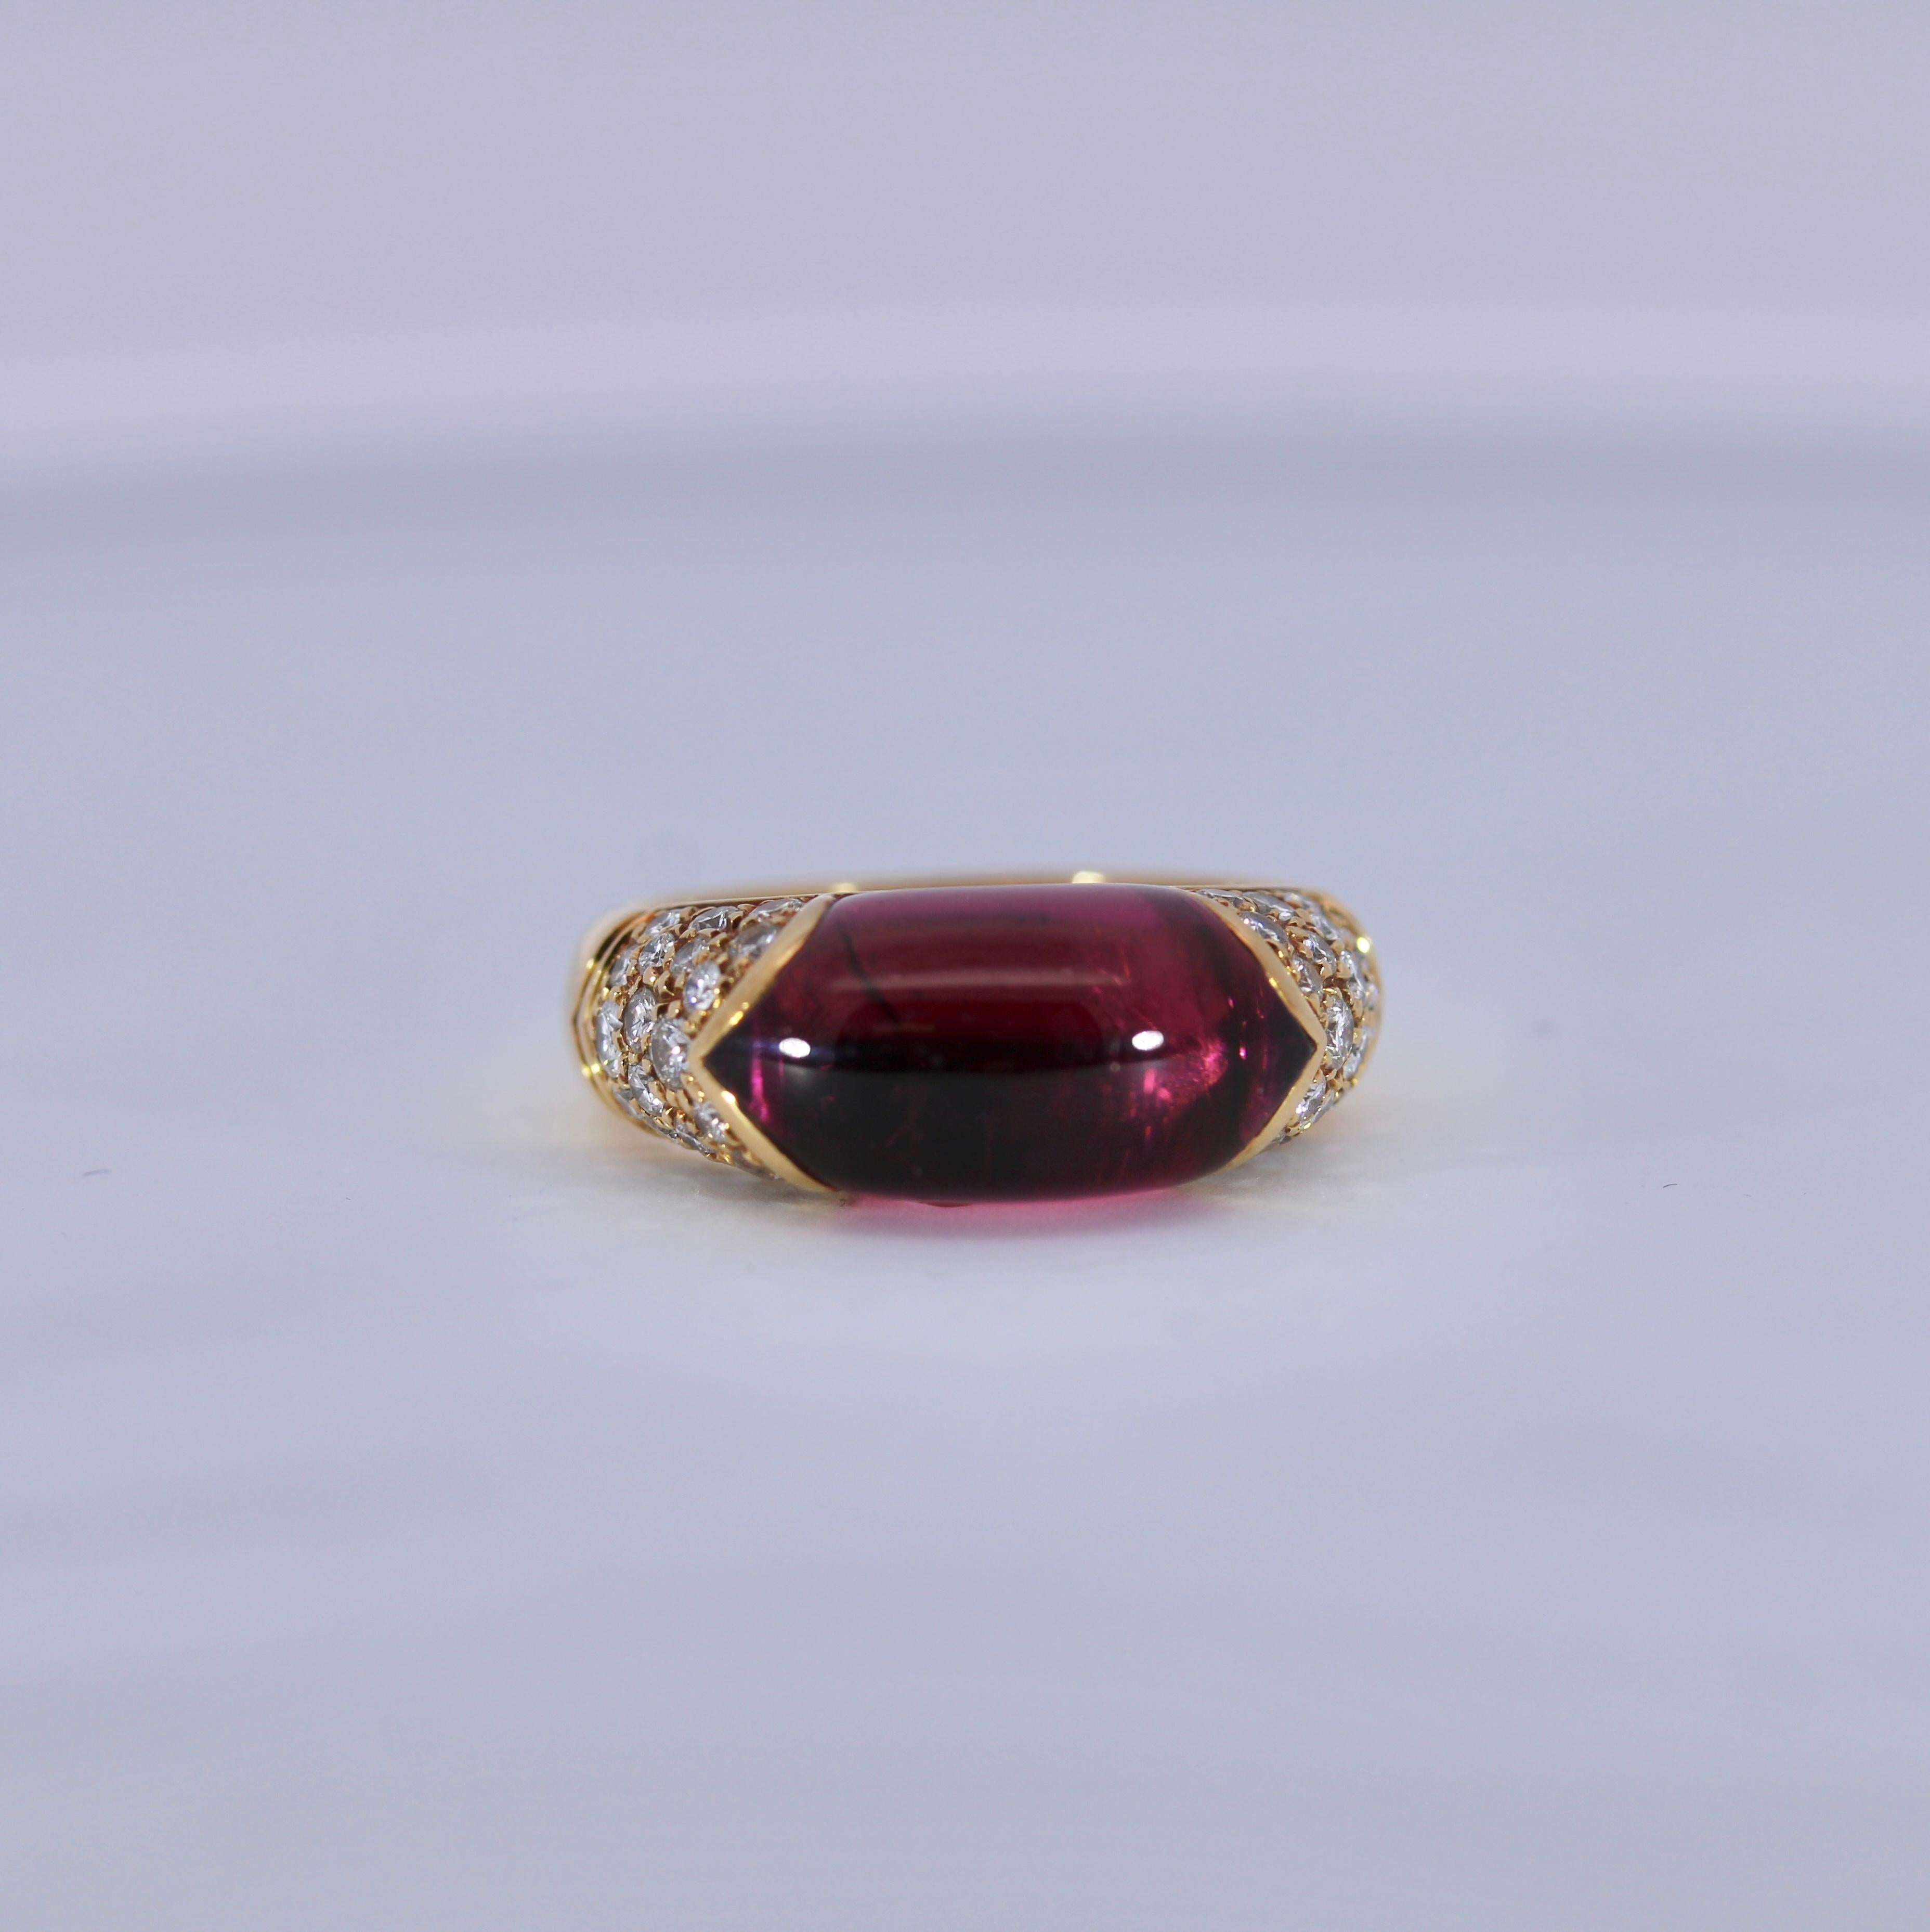 Bvgari Tronchetto 18K Yellow Gold With Three Rows of Diamonds Ring
Size: 5 US ( Resizable)
7.7g
CO: Italy

This designer Bulgari Tronchetto Pink Tourmaline Ring is finished in polished 18 karat yellow gold. 